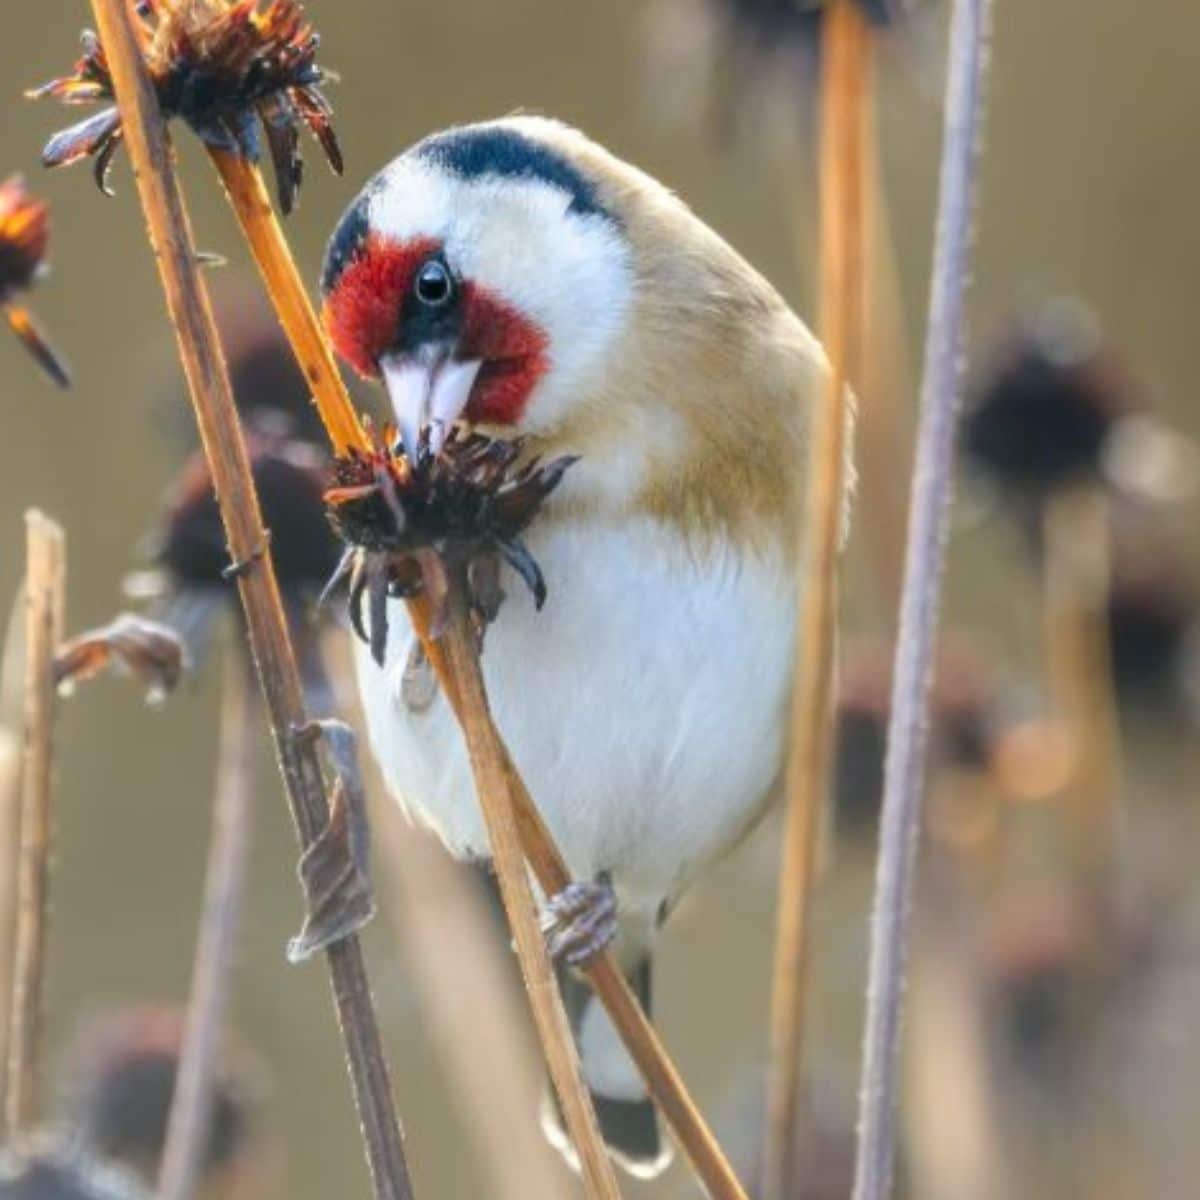 European Goldfinch enjoys nibbling and eating the seeds from spent flower heads of coneflower in a winter garden.